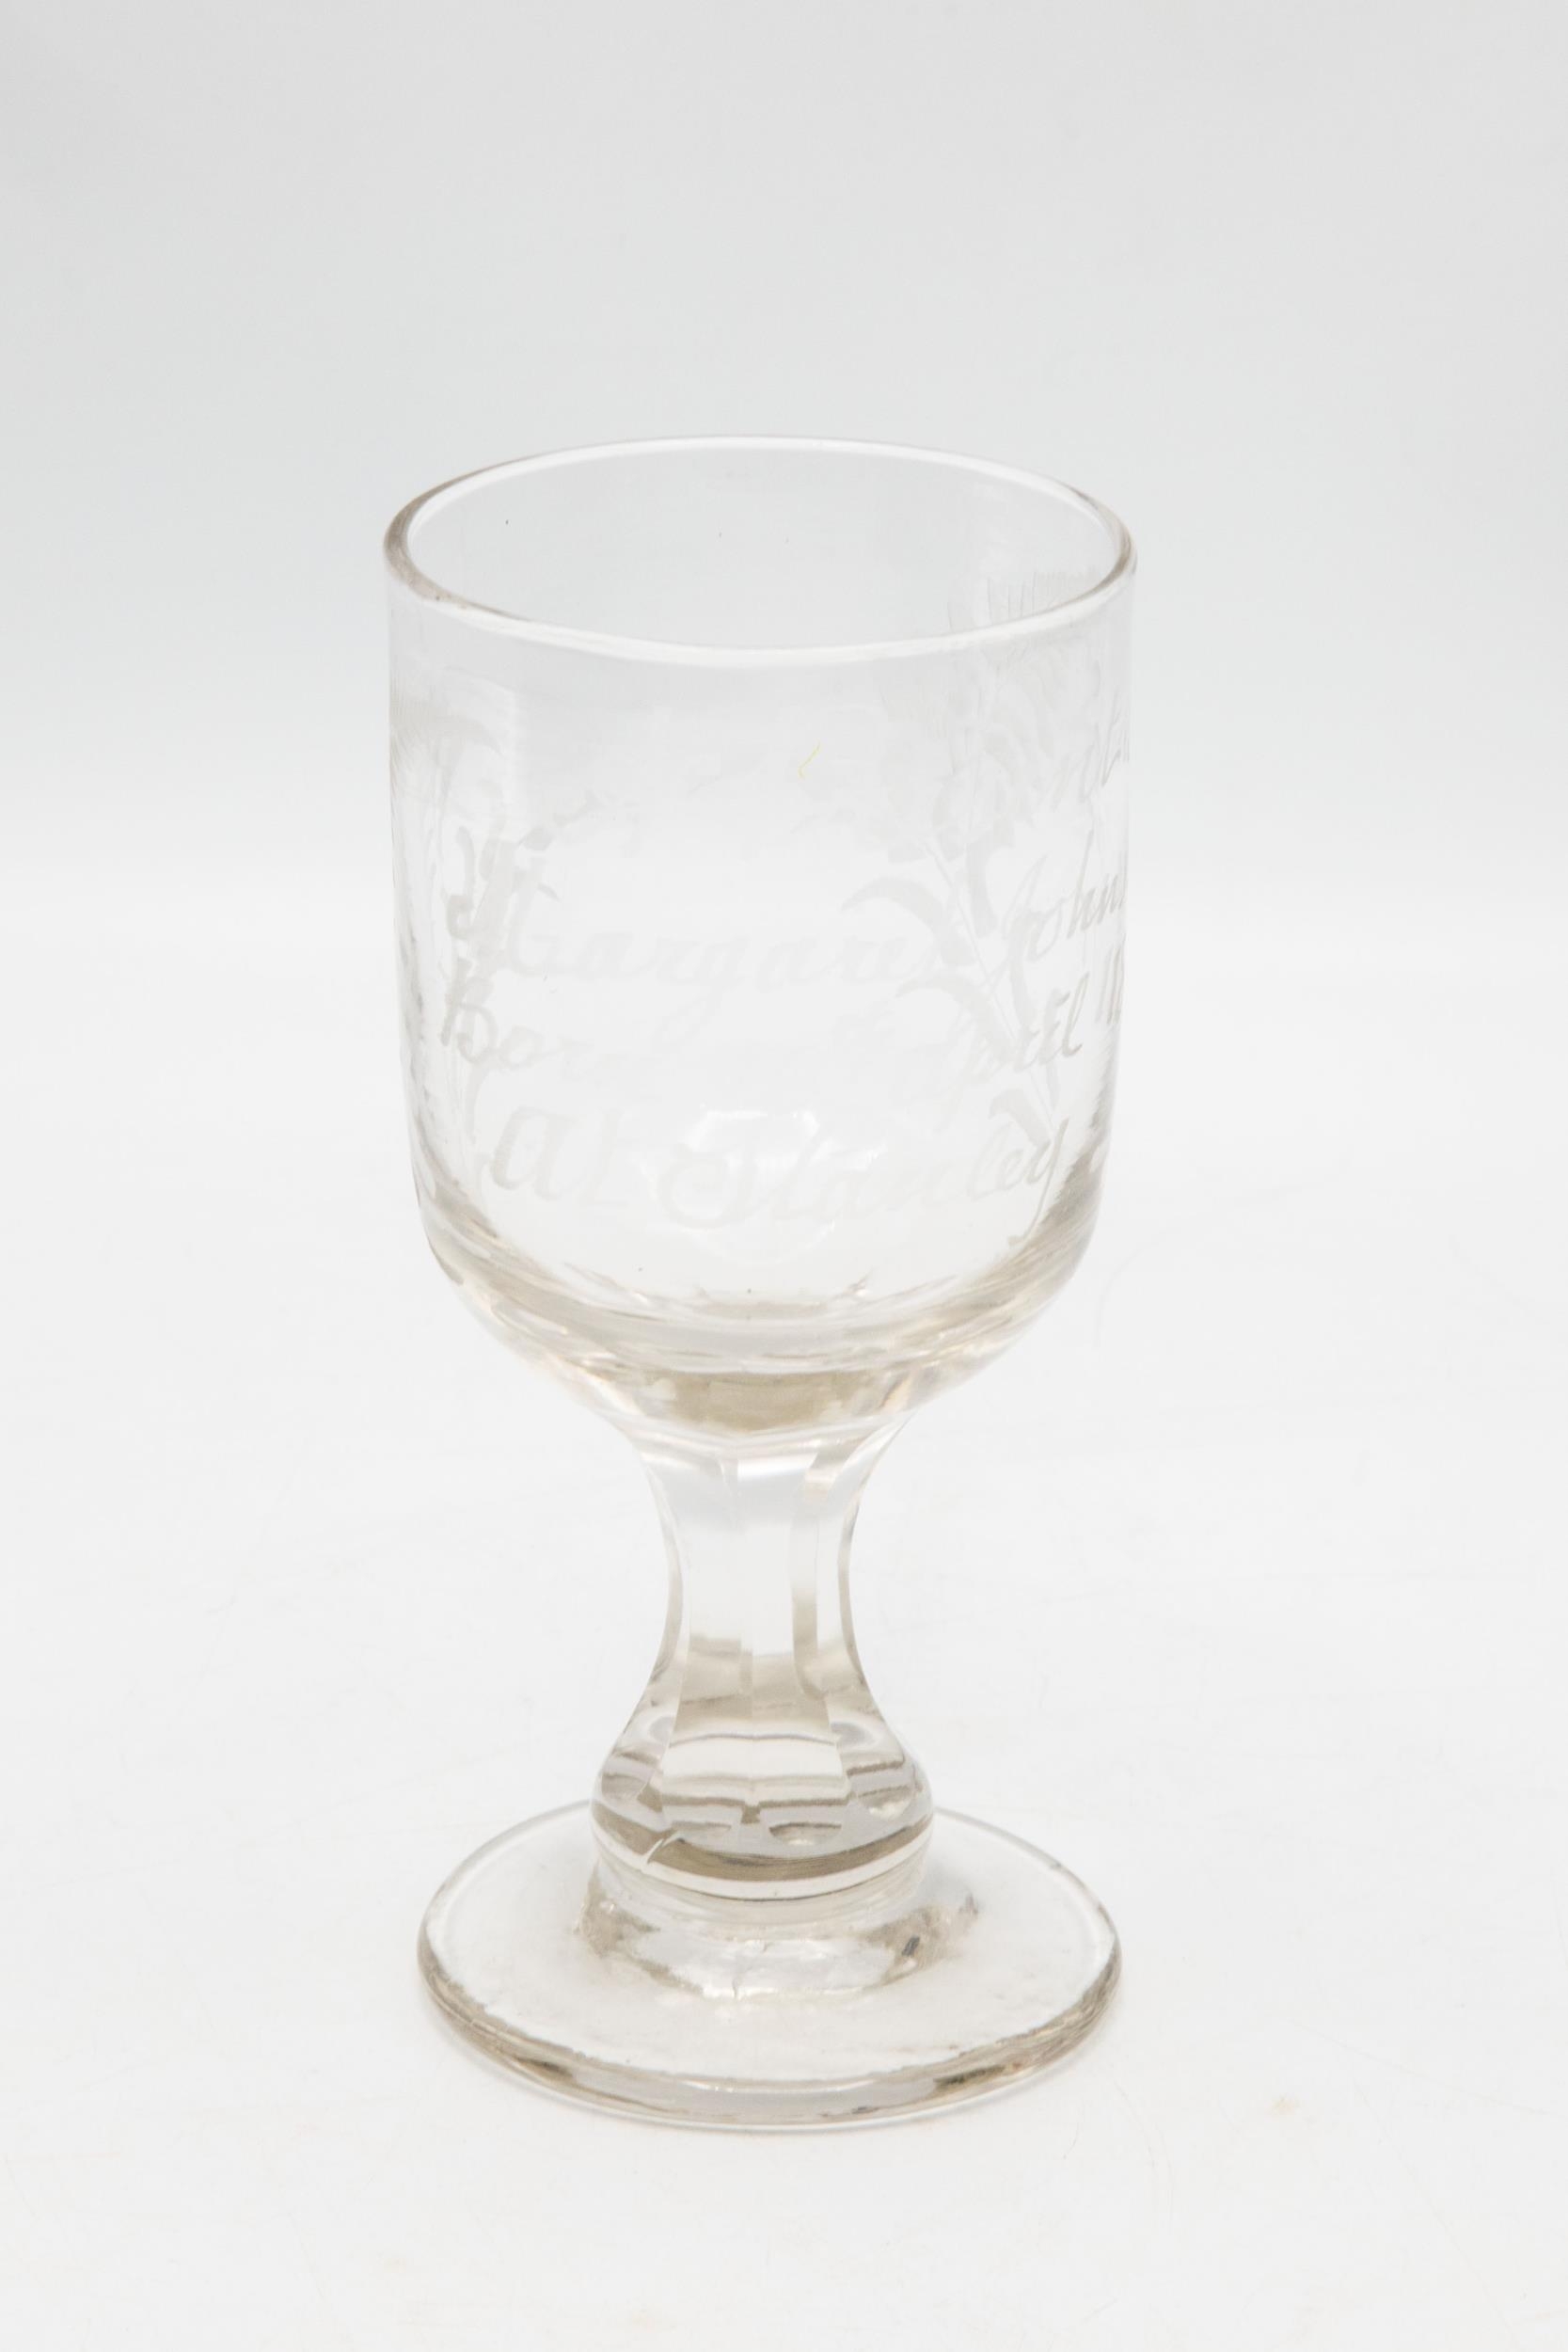 George III wine glass, acid etched with fern leaves and inscribed 'A present to Margaret Johnston,